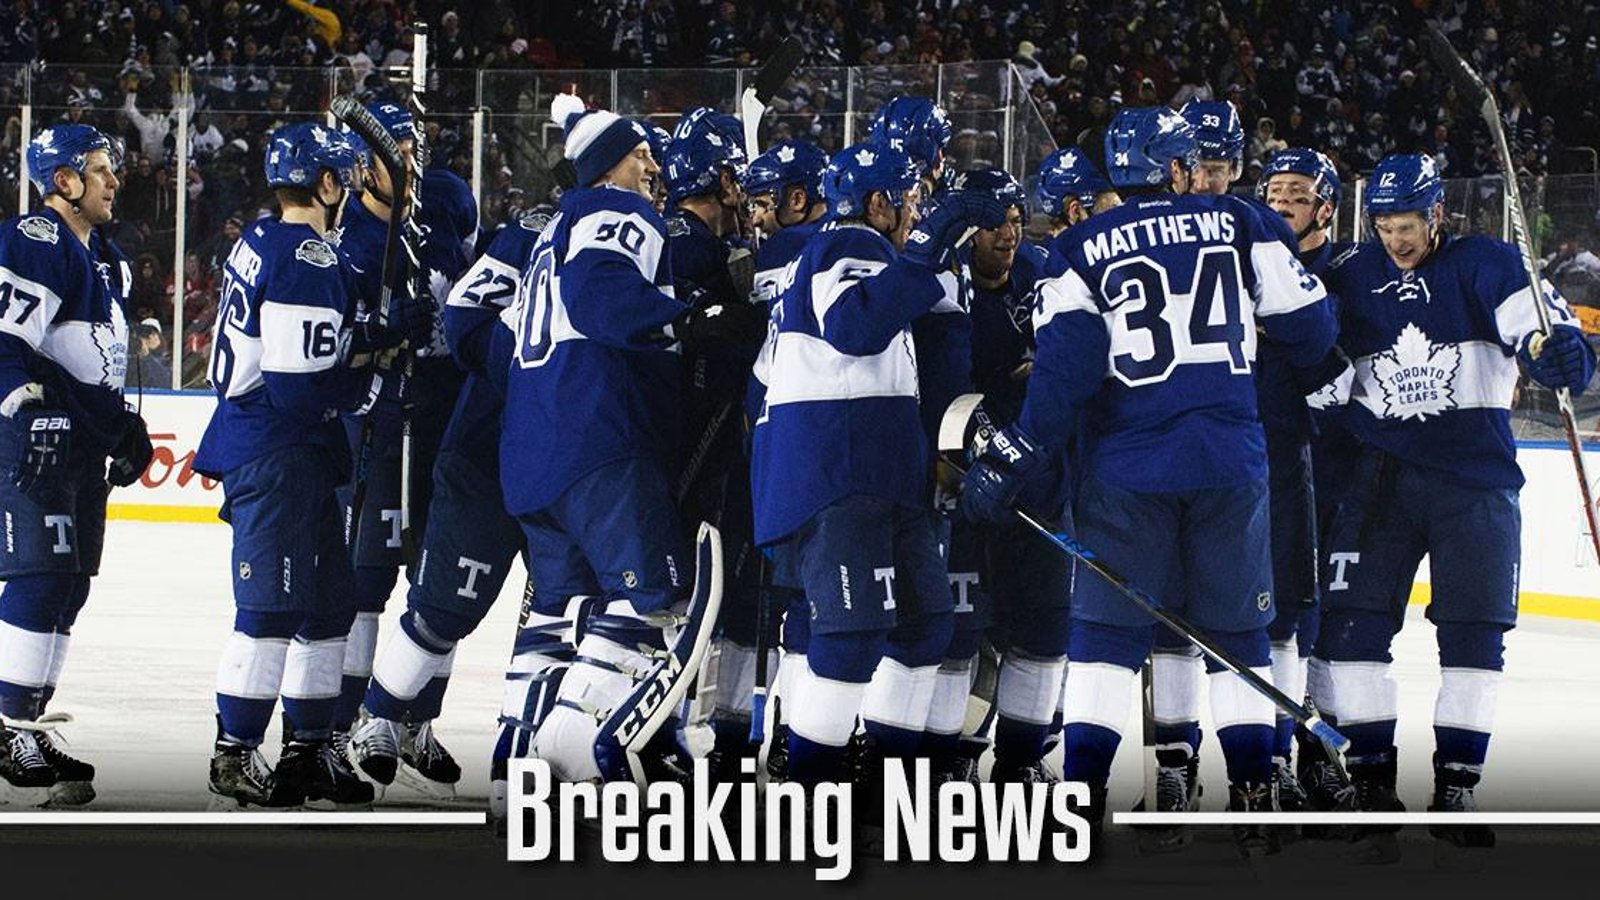 Breaking: Veteran NHL player has blocked a trade to the Maple Leafs.